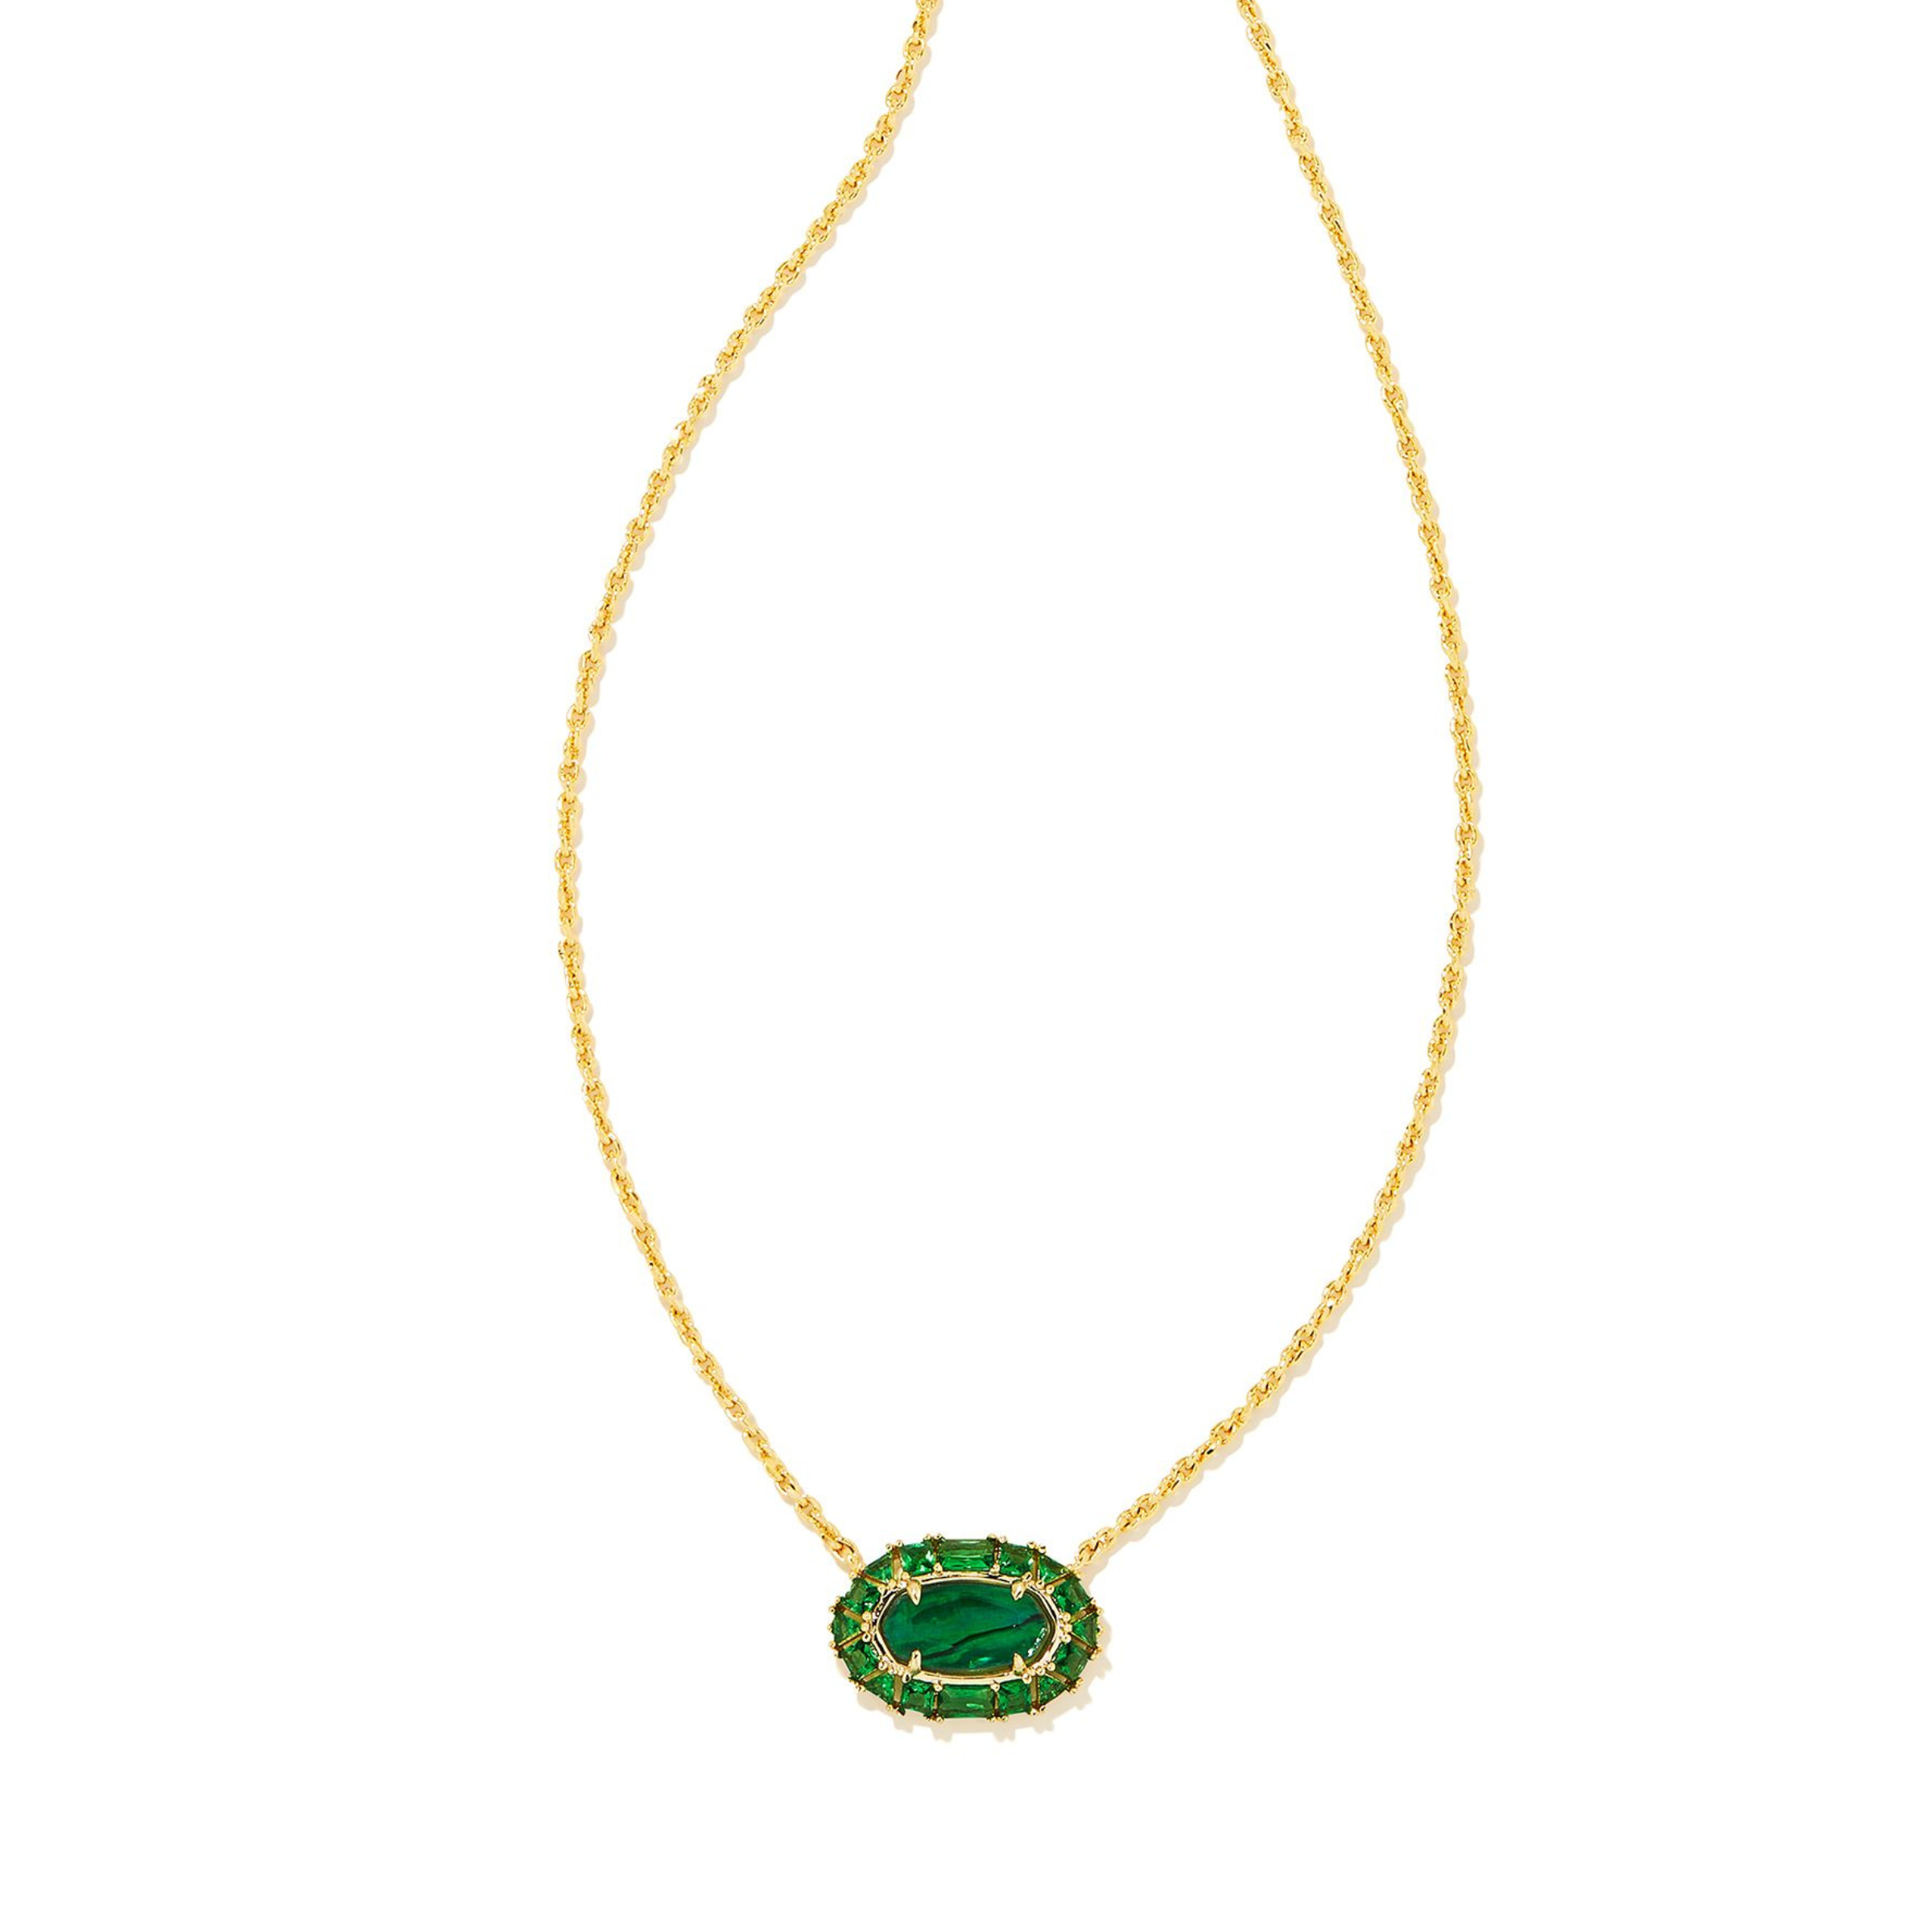 Gold chain necklace with a crystal and kelly green illusion oval pendant pictured on a white background. 